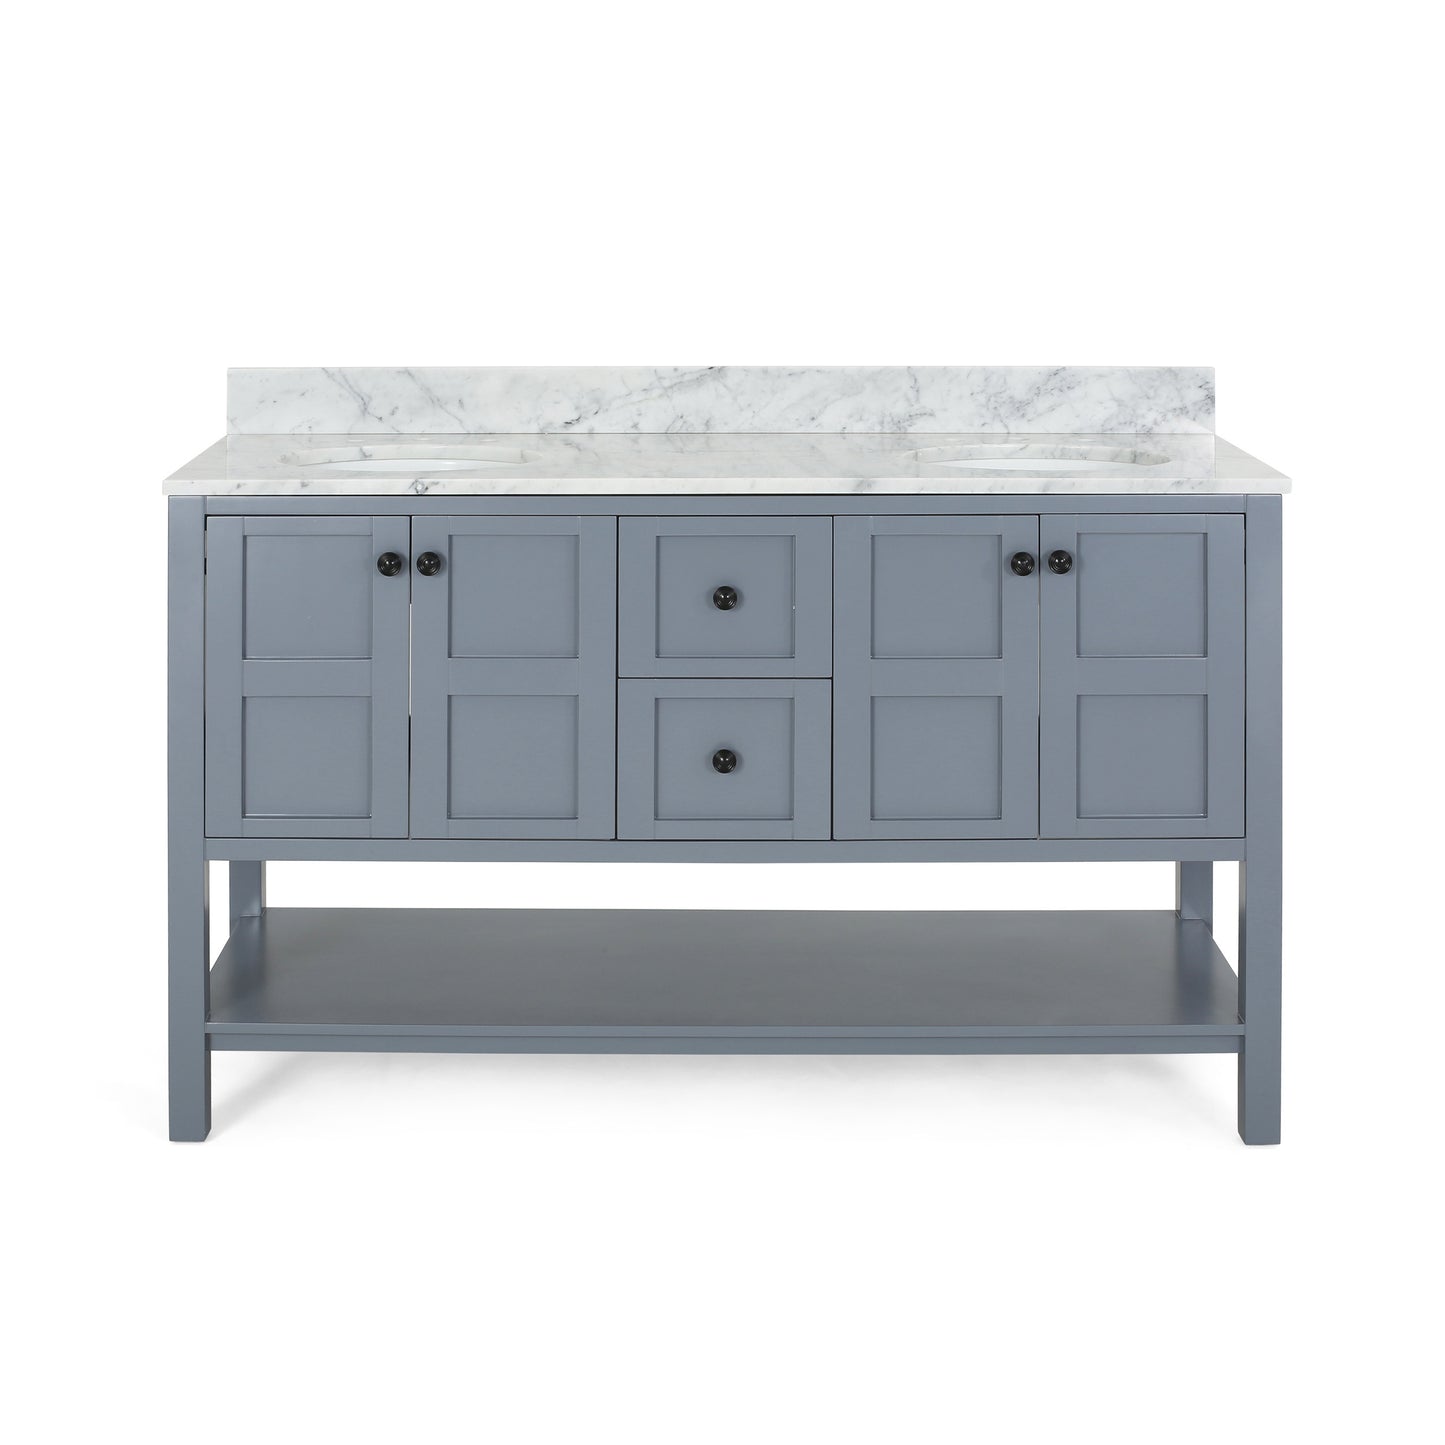 Jamison Contemporary 60" Wood Double Sink Bathroom Vanity with Marble Counter Top with Carrara White Marble